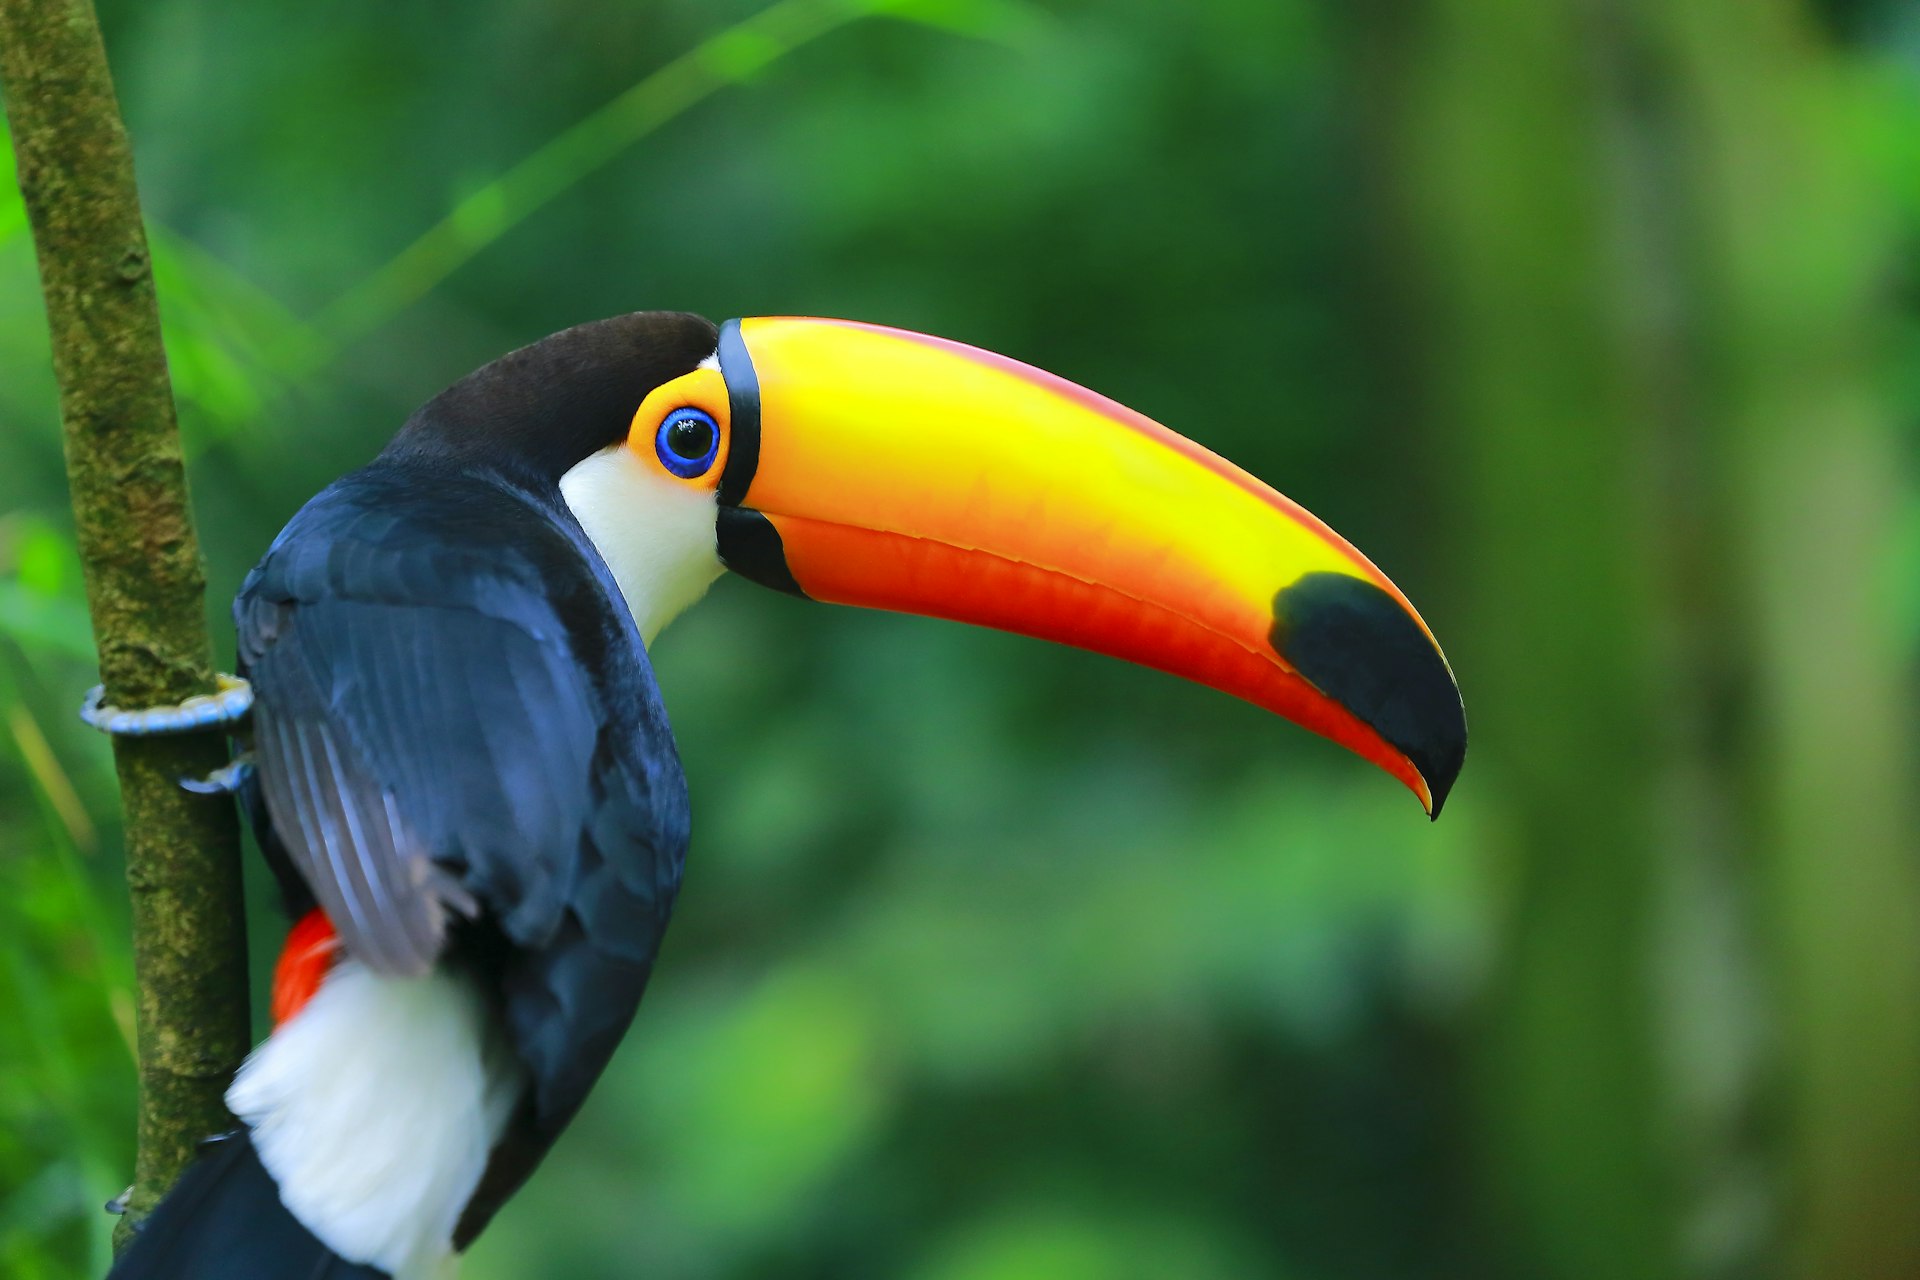 A colourful toucan perched on a branch in the Pantanal, Brazil, world's largest tropical wetland.